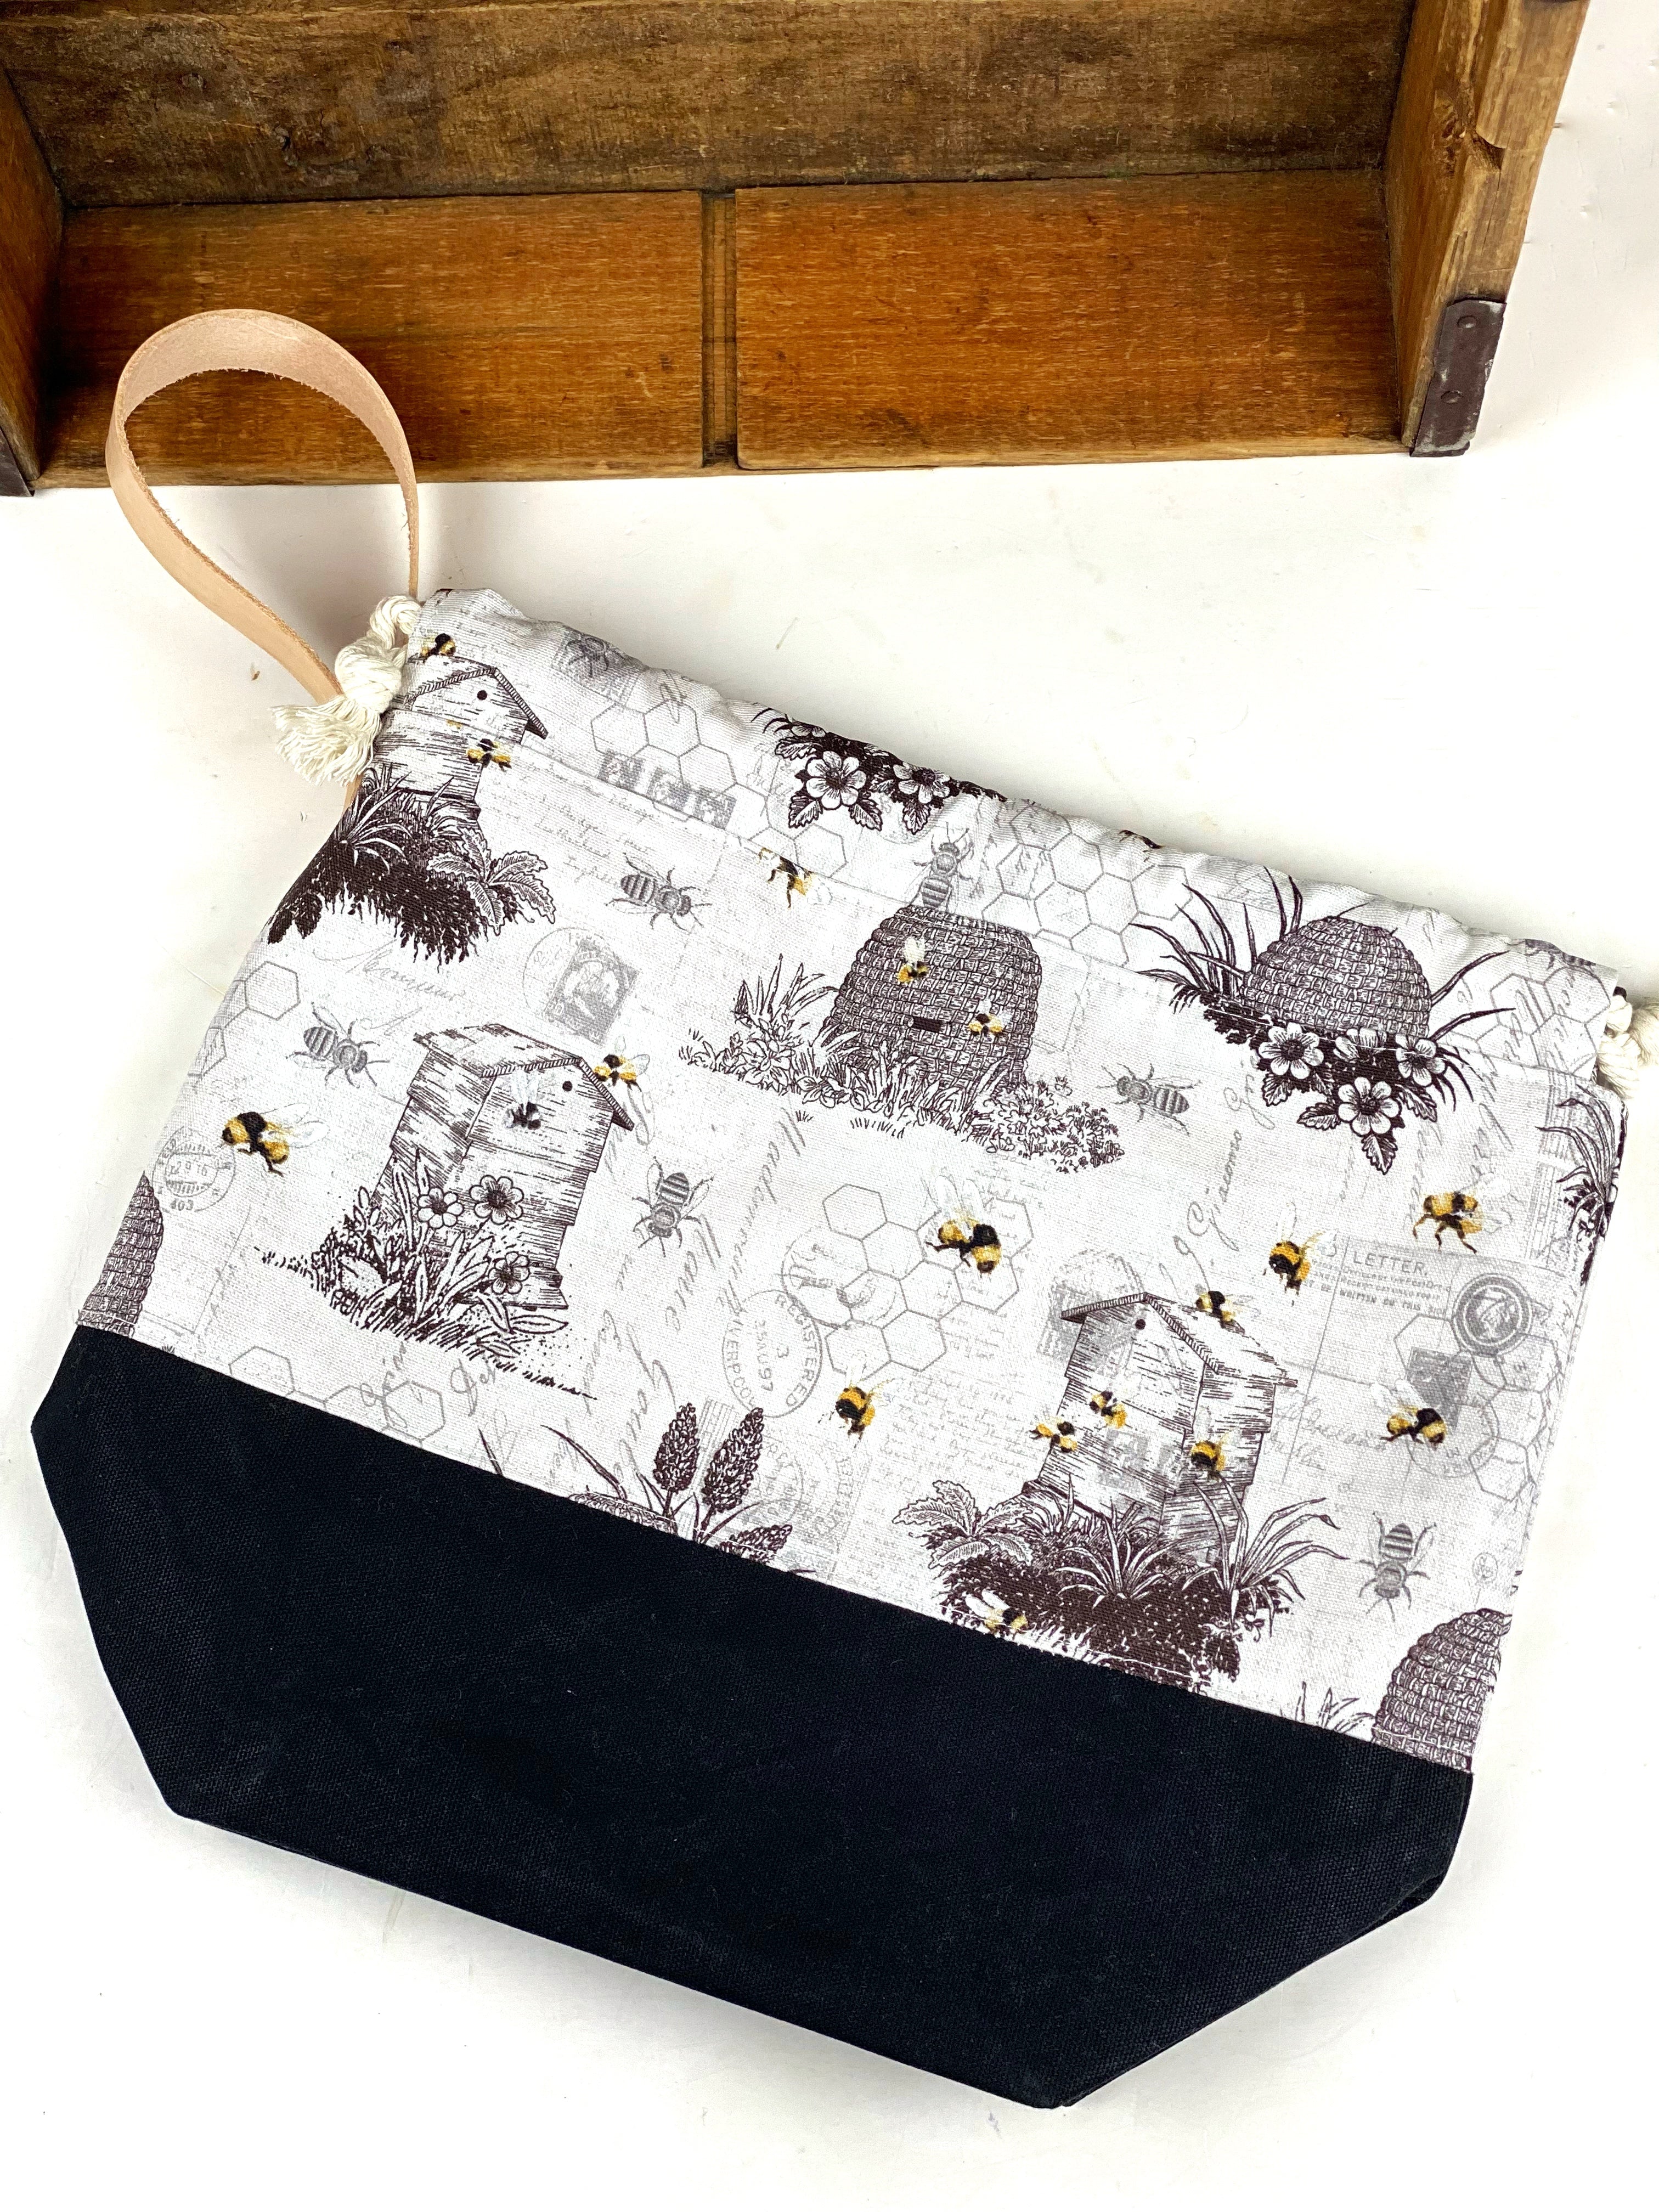 Honey Bee Project Bag, Beehive Canvas Project Bag, Project Bag for Knitters, Crochet Project Bag